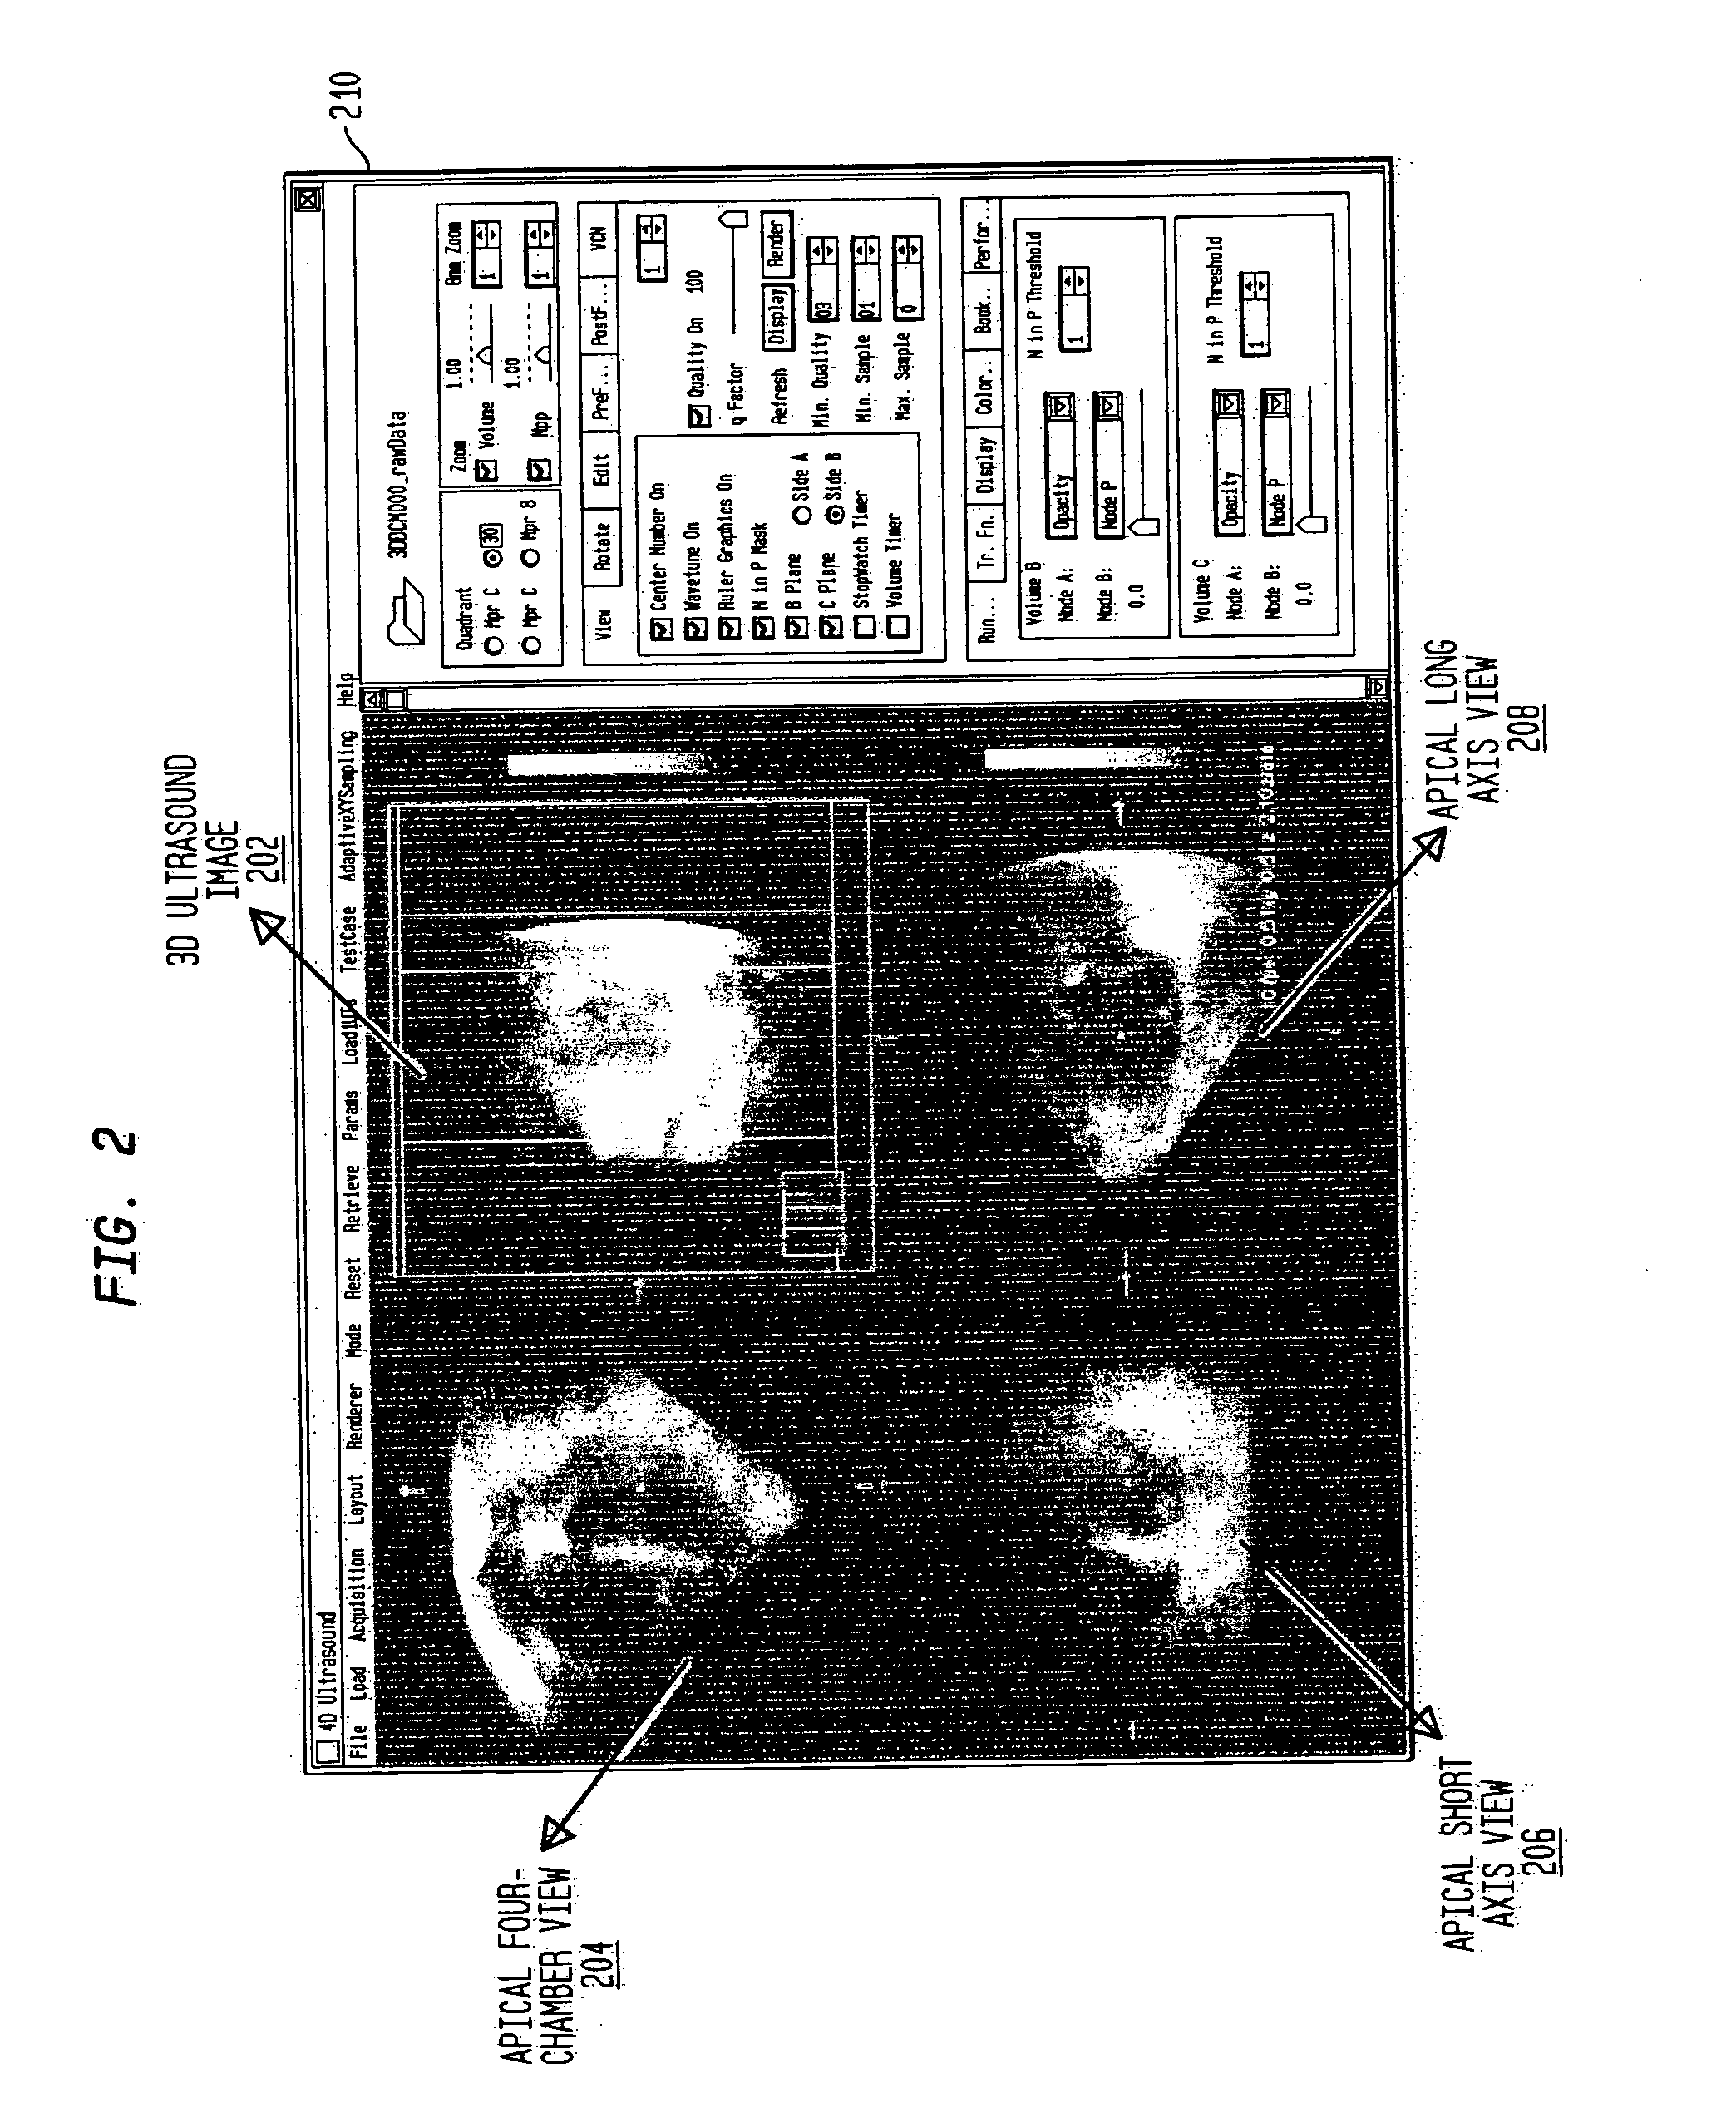 System and method for tracking anatomical structures in three dimensional images